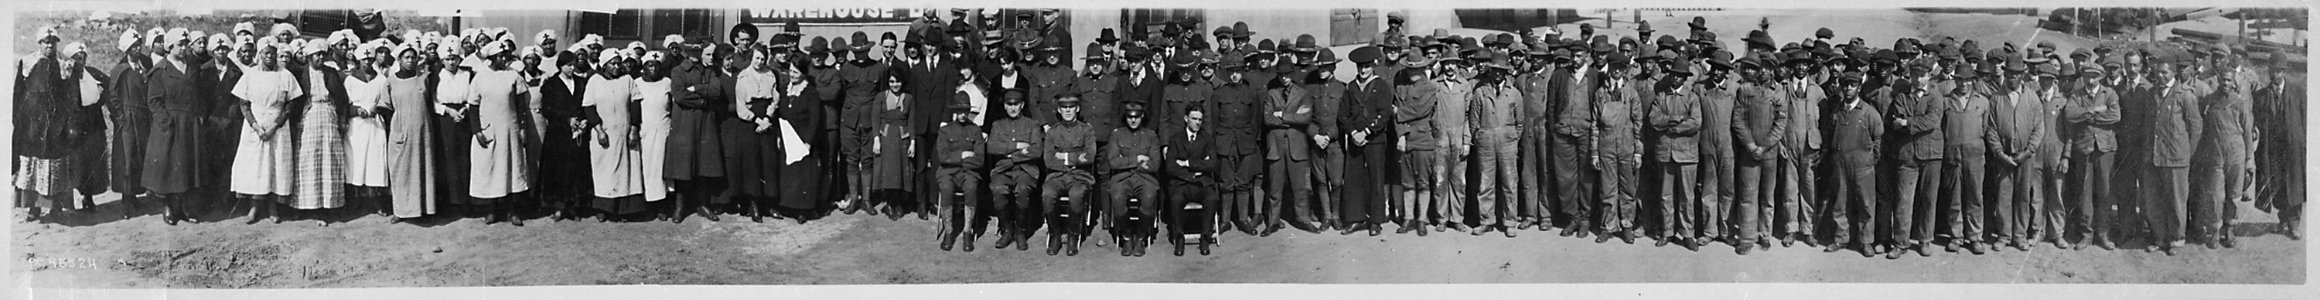 Working personnel of Field Medical Supply Depot. Washington, DC, March 22, 1919., ca. 1934 - ca. 1934 - NARA - 533261 photo